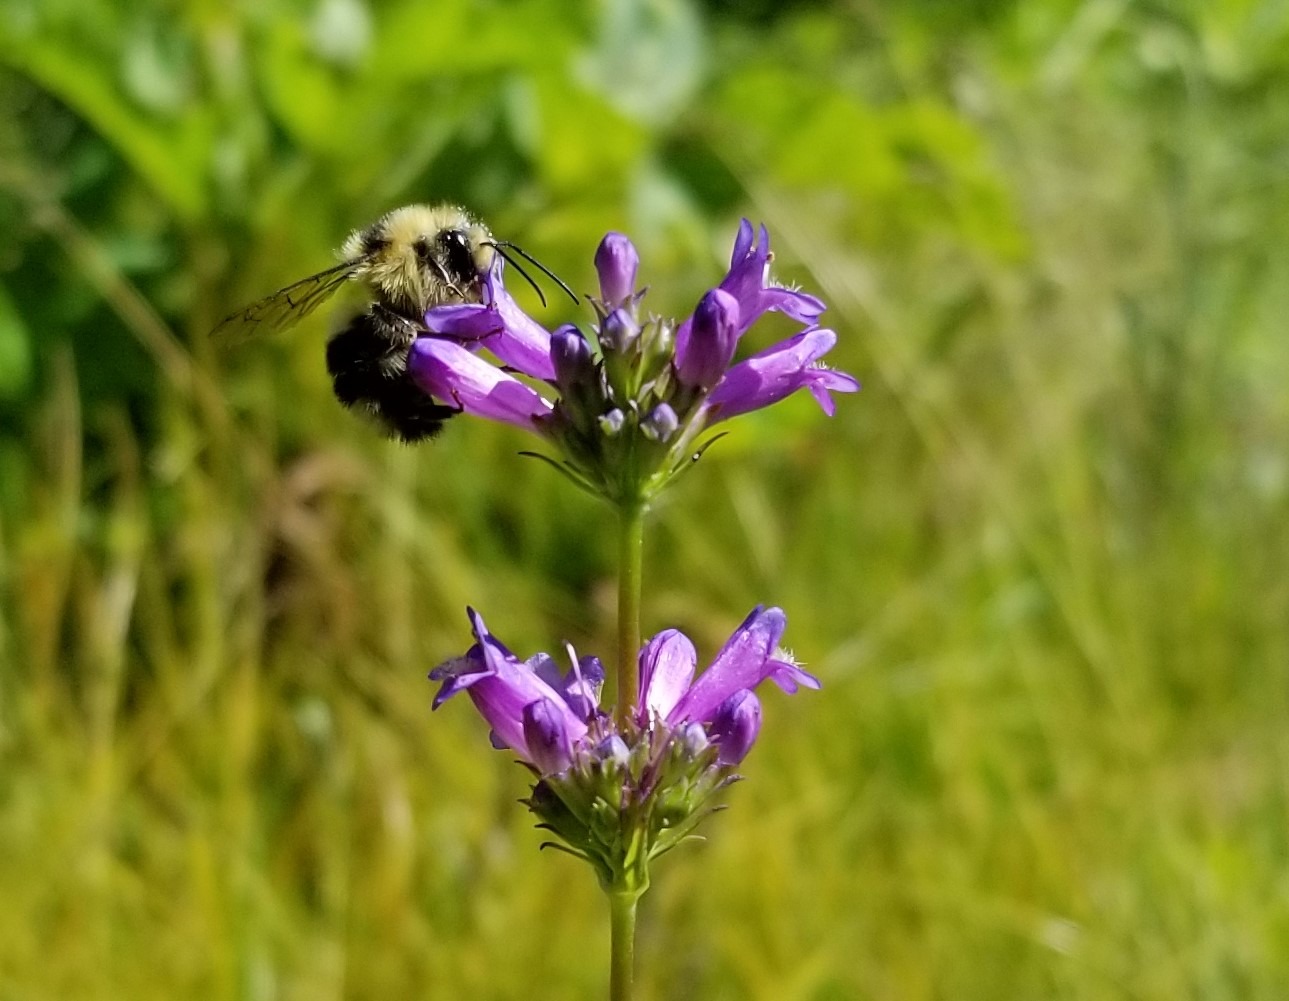 A bee on a purple penstemon flower that was planted as part of restoration efforts in Yosemite Valley. Photo: NPS, July 2019.